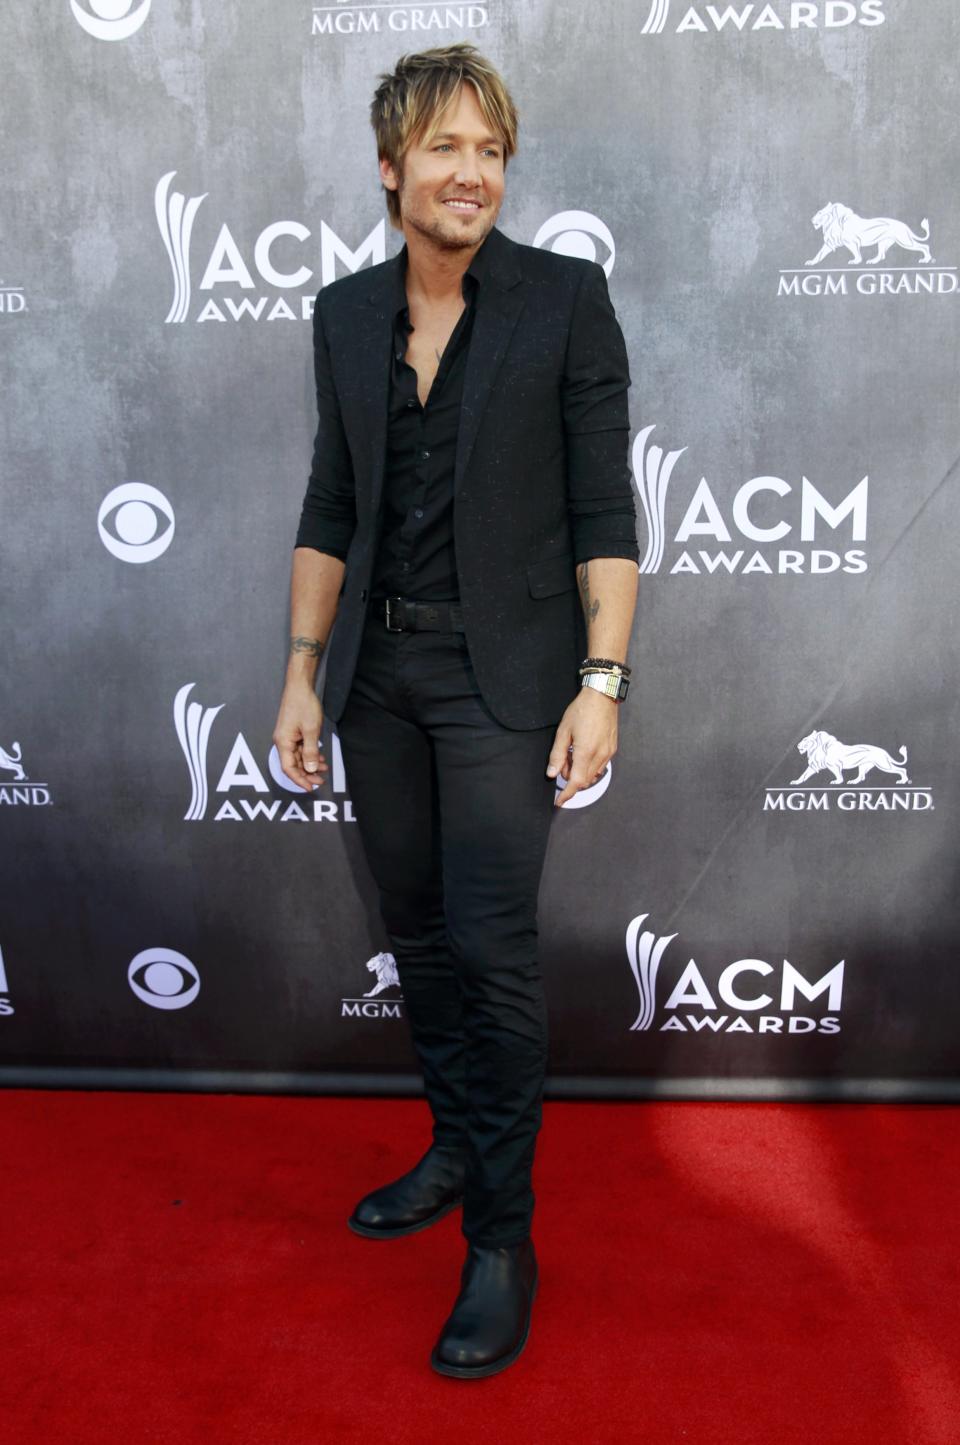 Musician Keith Urban arrives at the 49th Annual Academy of Country Music Awards in Las Vegas, Nevada April 6, 2014. REUTERS/Steve Marcus (UNITED STATES - Tags: ENTERTAINMENT)(ACMAWARDS-ARRIVALS)